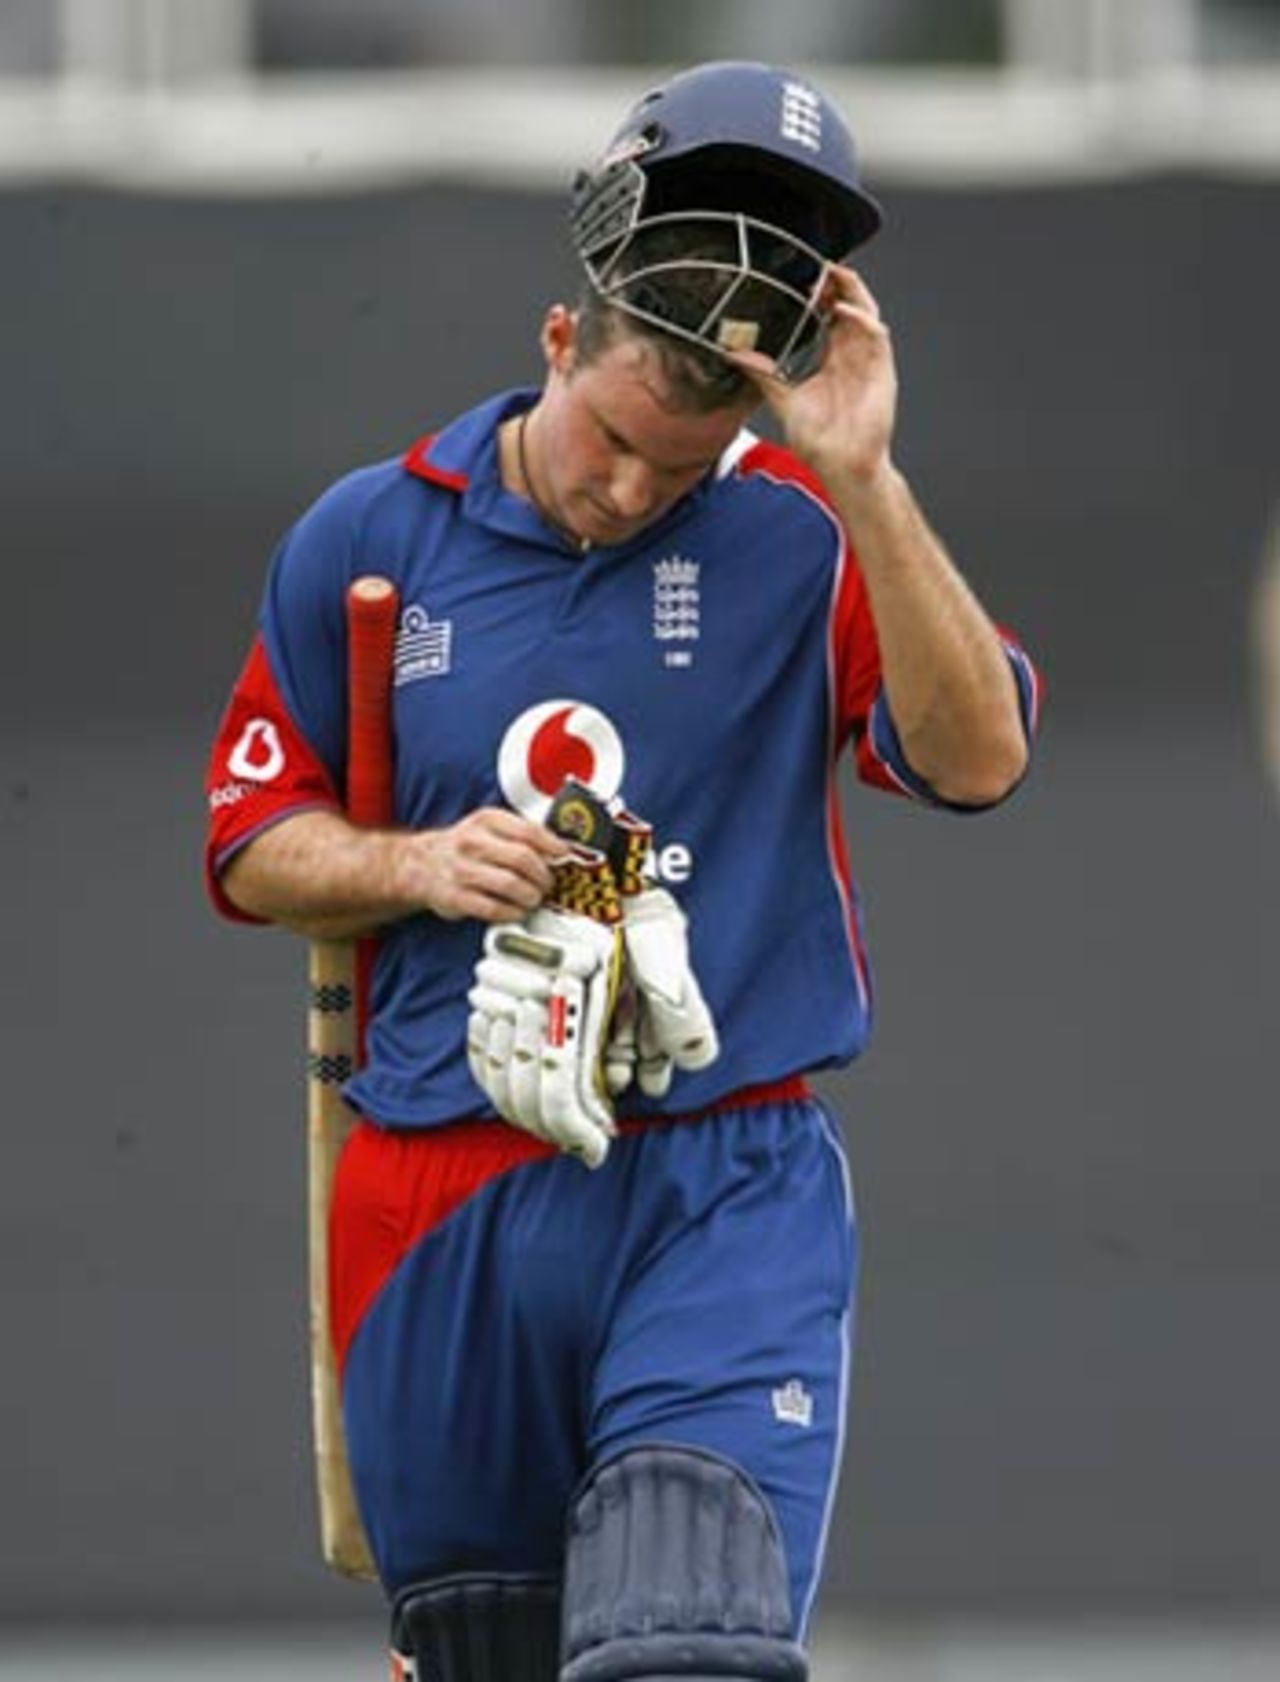 Andrew Strauss trudges off after being dismissed when well set, England v Pakistan, 3rd ODI, The Rose Bowl, September 5, 2006